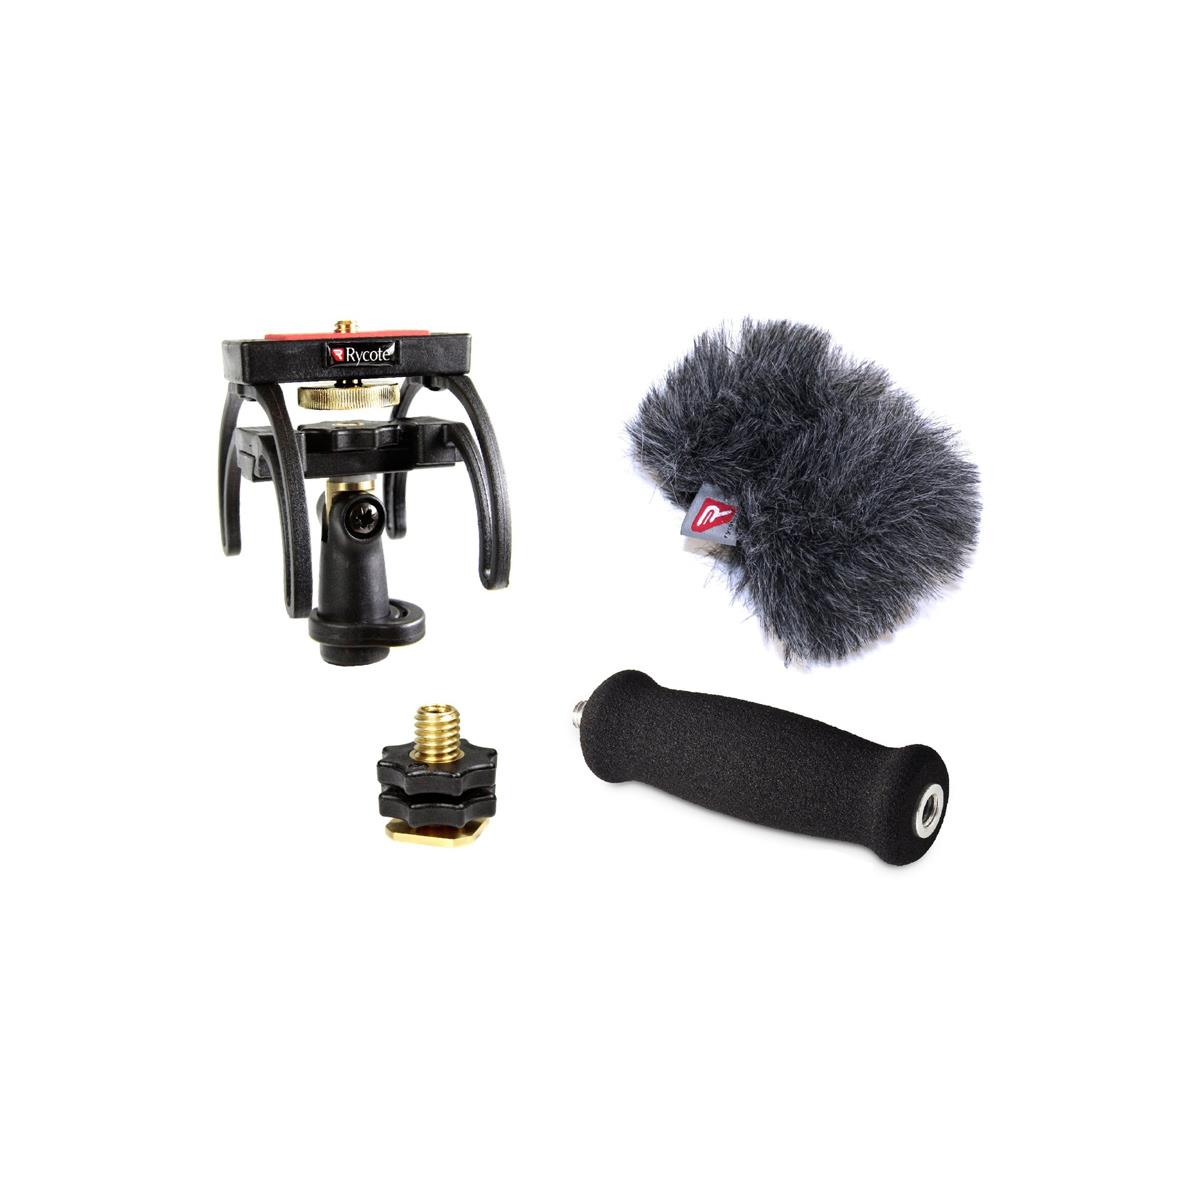 Image of Rycote Recorder Audio Kit for Sony PCM-D50 Digital Recorder